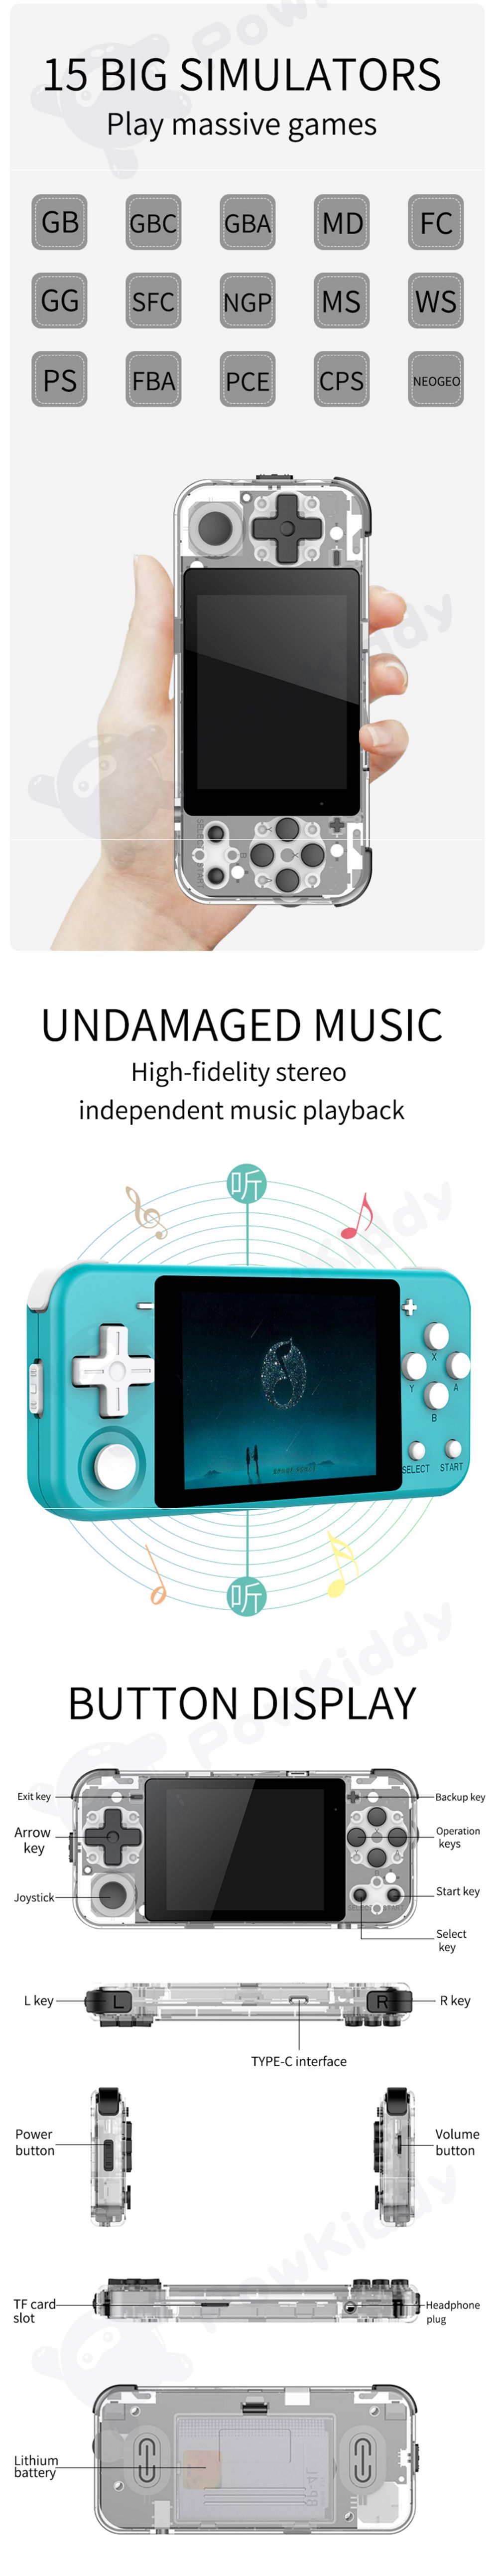 POWKIDDY-Q90-16GB-3-inch-HD-IPS-Screen-Handheld-Retro-Video-Game-Console-Player-15-Simulator-Support-1644020